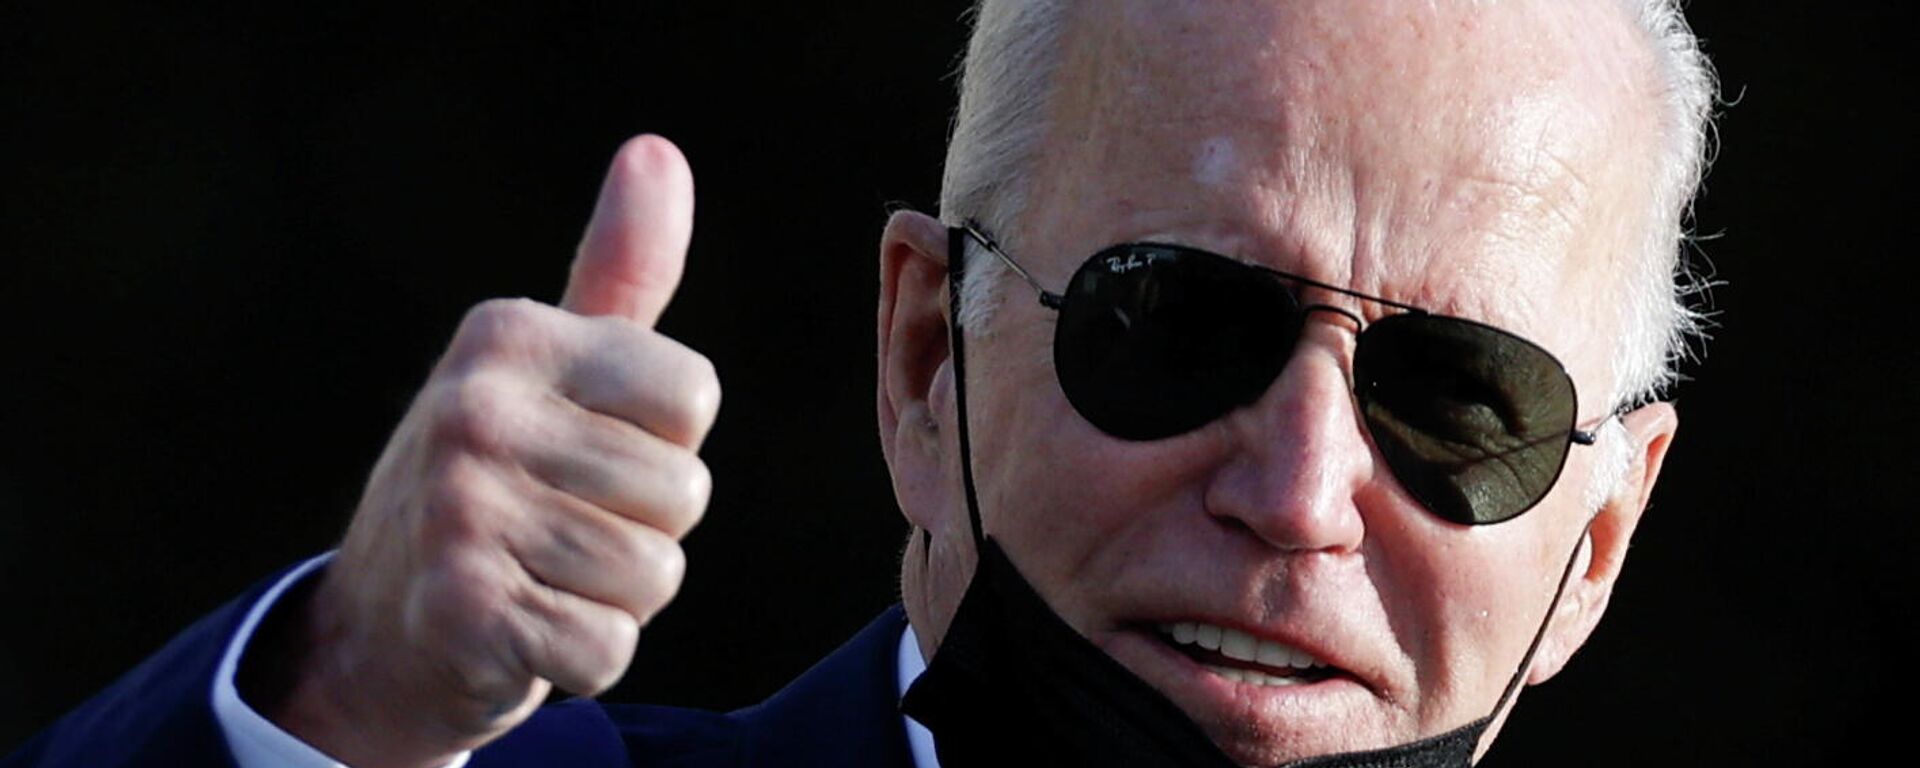 U.S. President Joe Biden gestures to reporters as he departs his annual physical at Walter Reed National Military Medical Center in Bethesda, Maryland, U.S. November 19, 2021. - Sputnik International, 1920, 19.11.2021